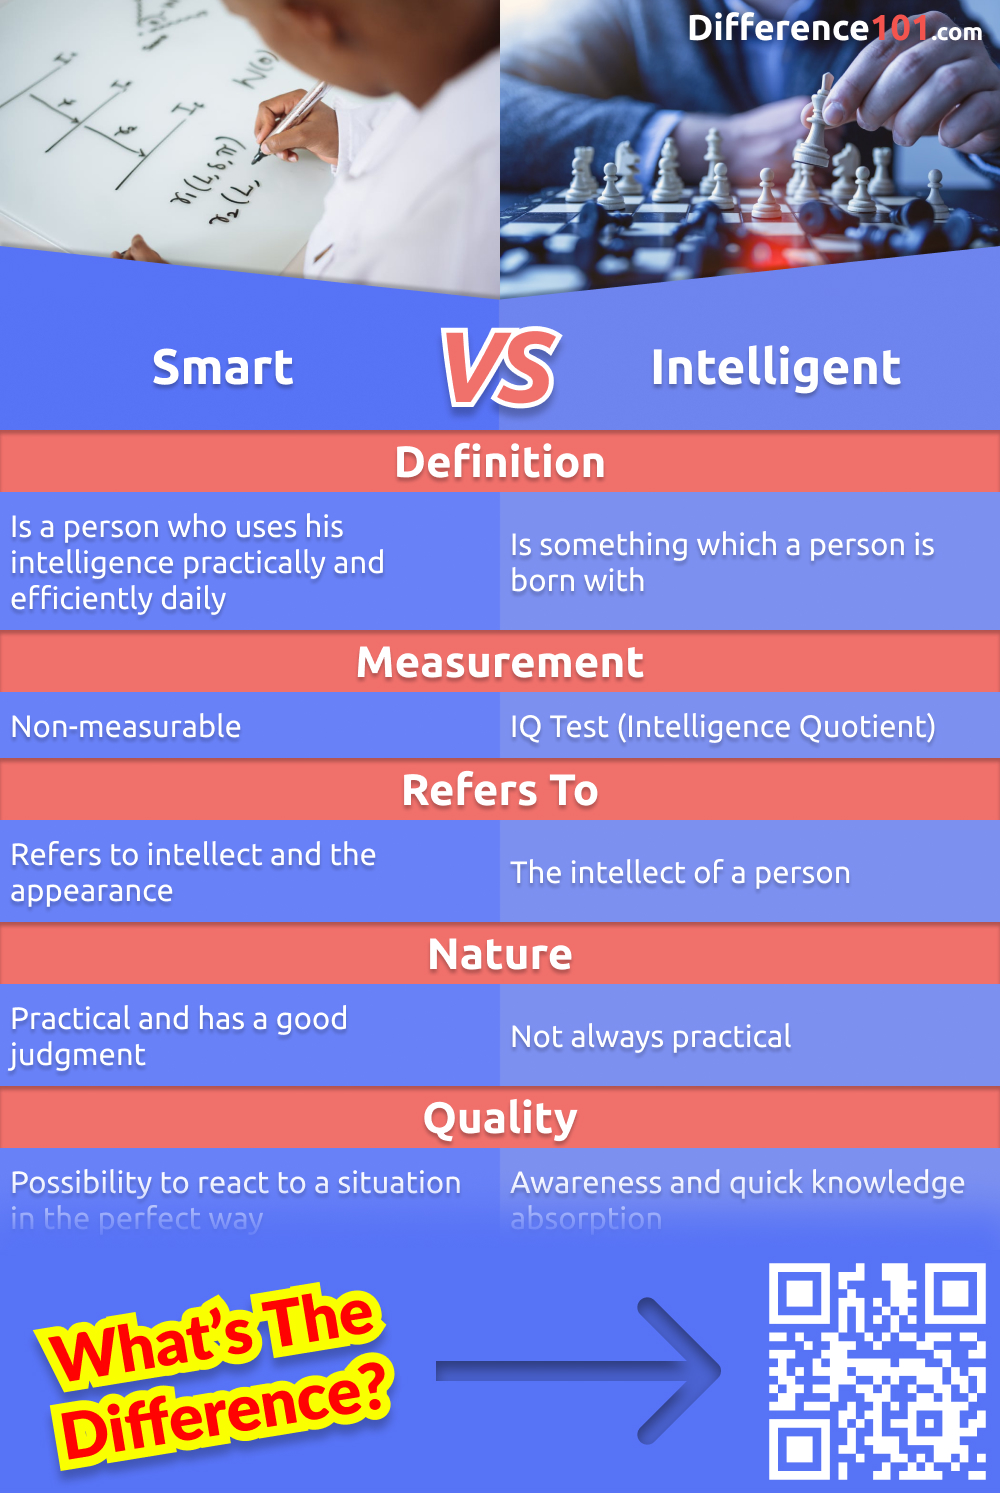 Intelligence and smartness are two words that are often used interchangeably. But are they really the same thing? Read on and find out.